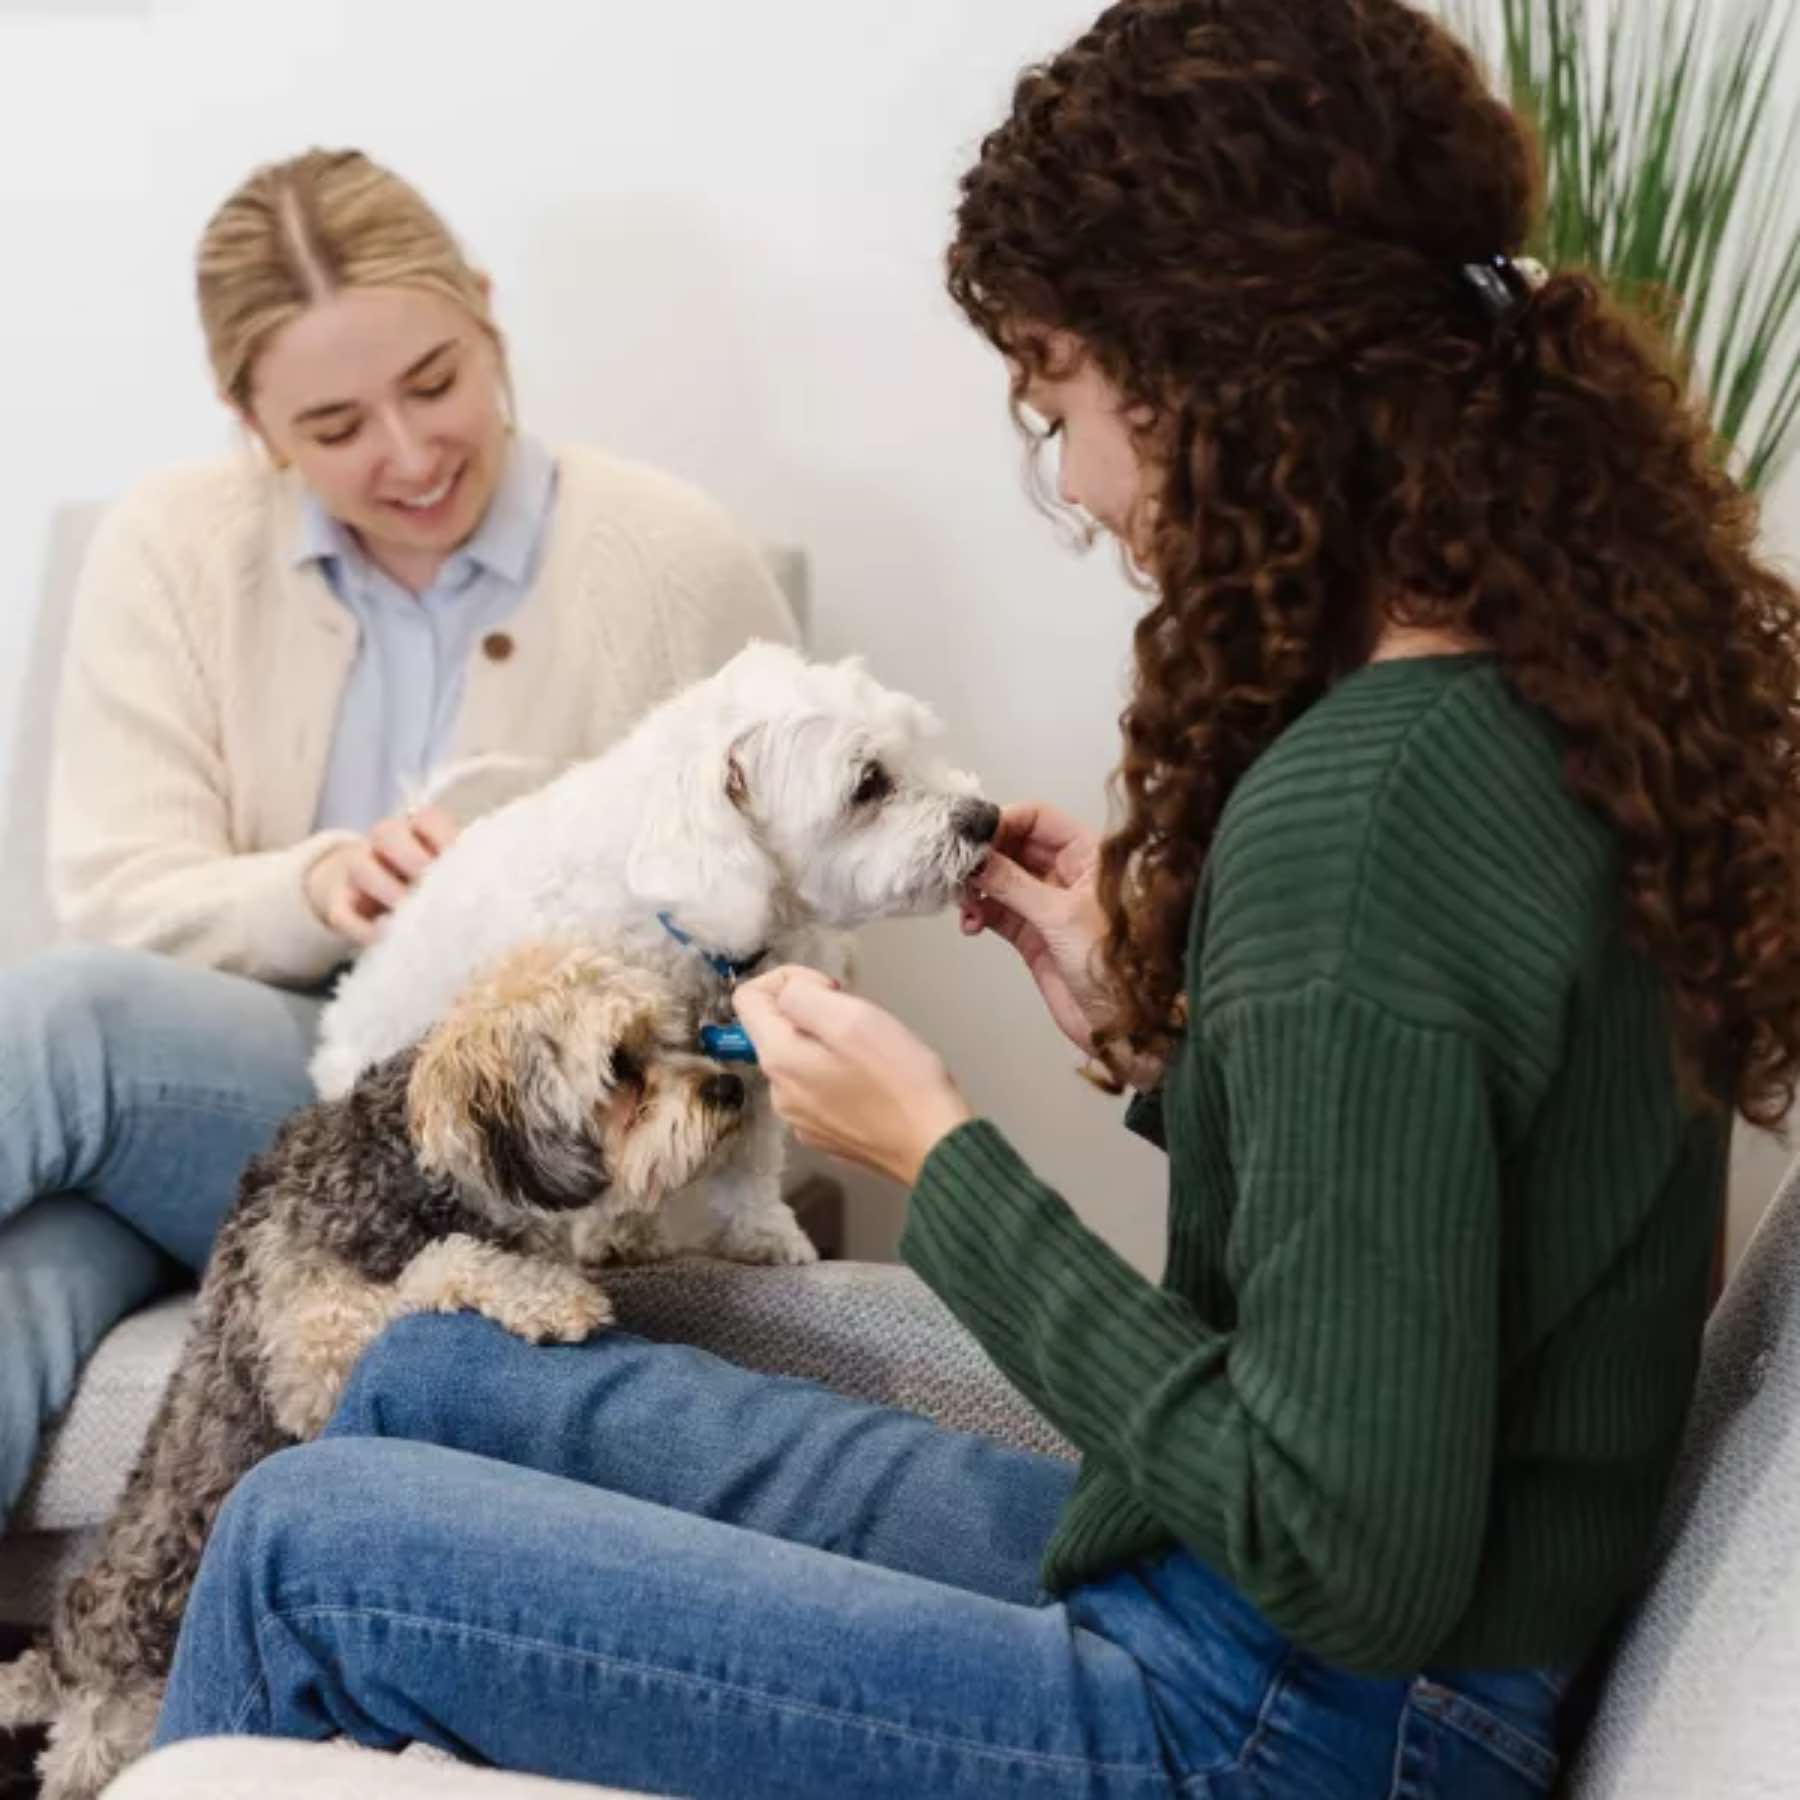 Women playing with puppies are enjoying the health benefits of pets - learn more with Zerorez Calgary.